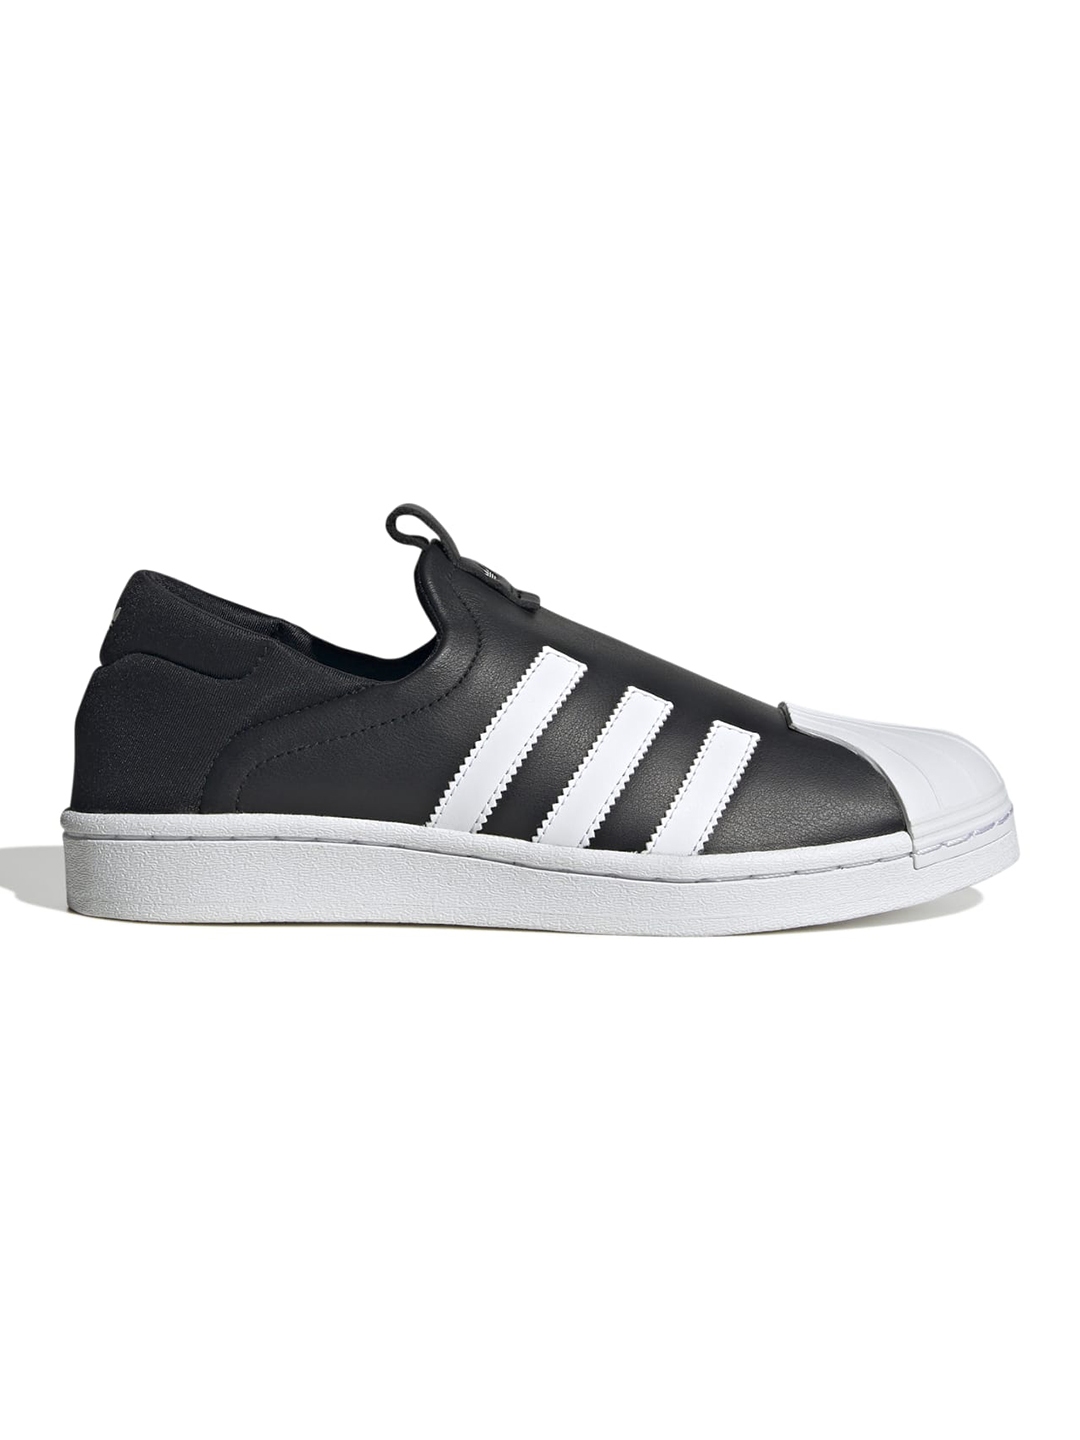 Buy ADIDAS Originals Women Black Leather Fashion - Casual Shoes for ...